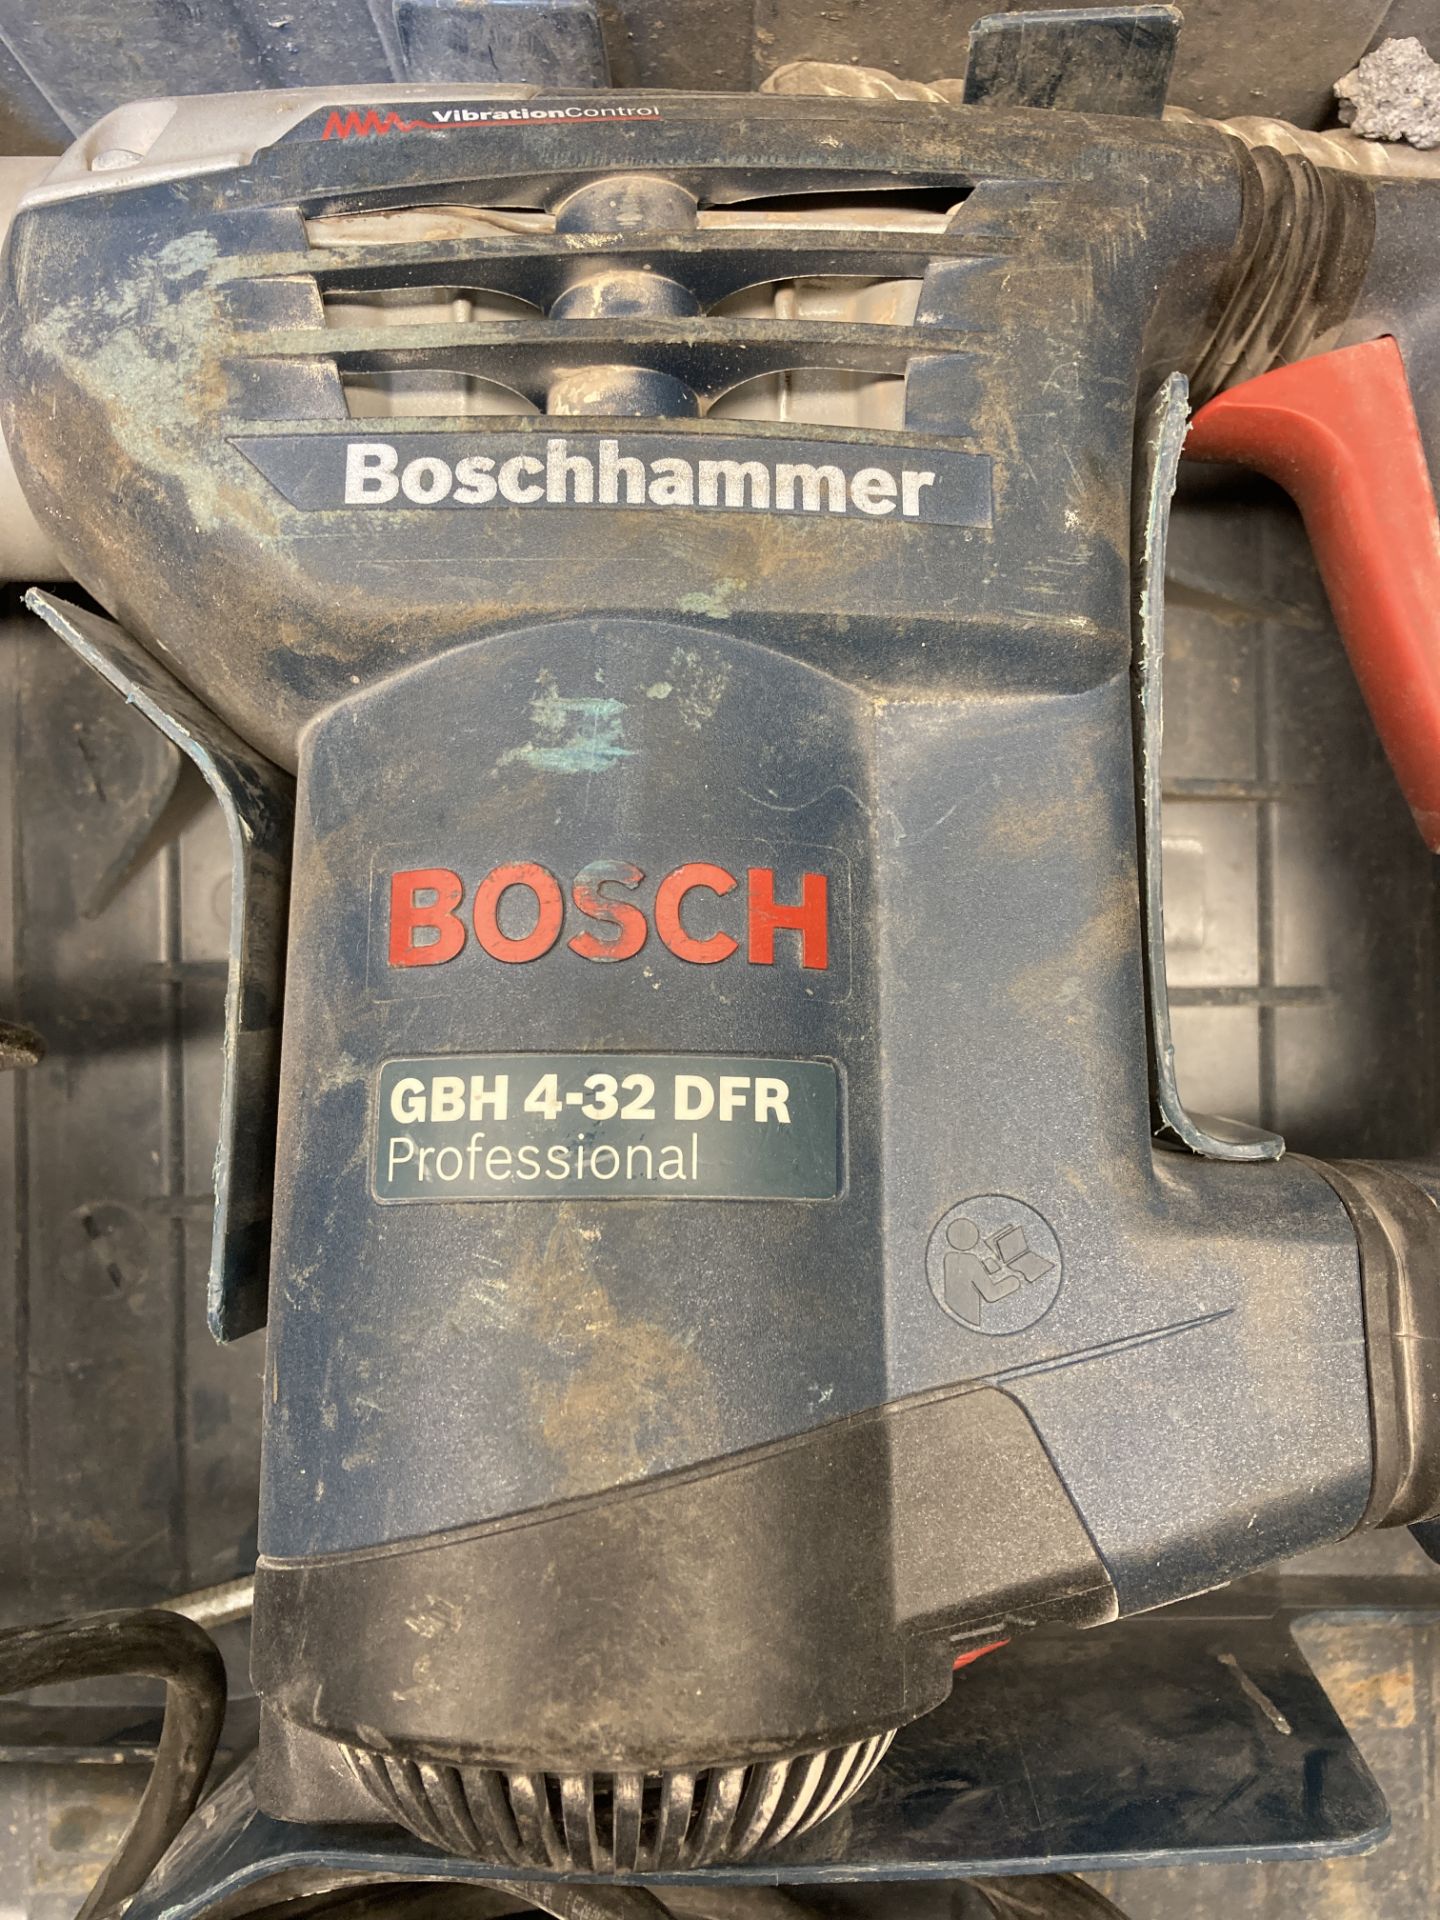 Bosch GBH 4-32 DFR Professional Rotary Hammer Drill W/ Case & Accessories| 110v - Image 3 of 4